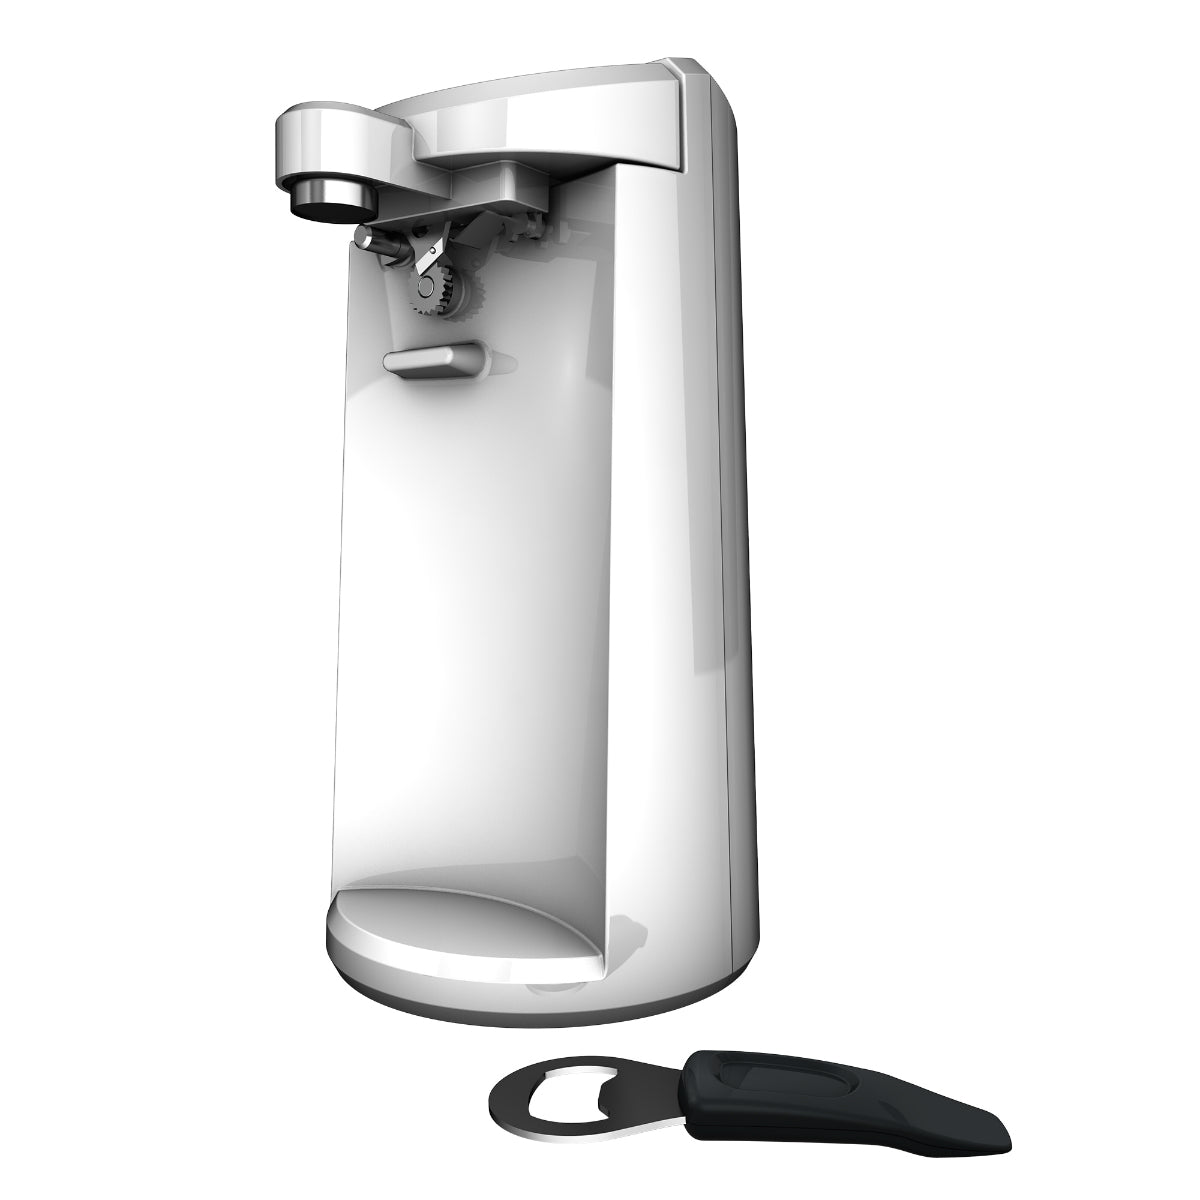 Oster 003147-000-002 Can Opener for sale online